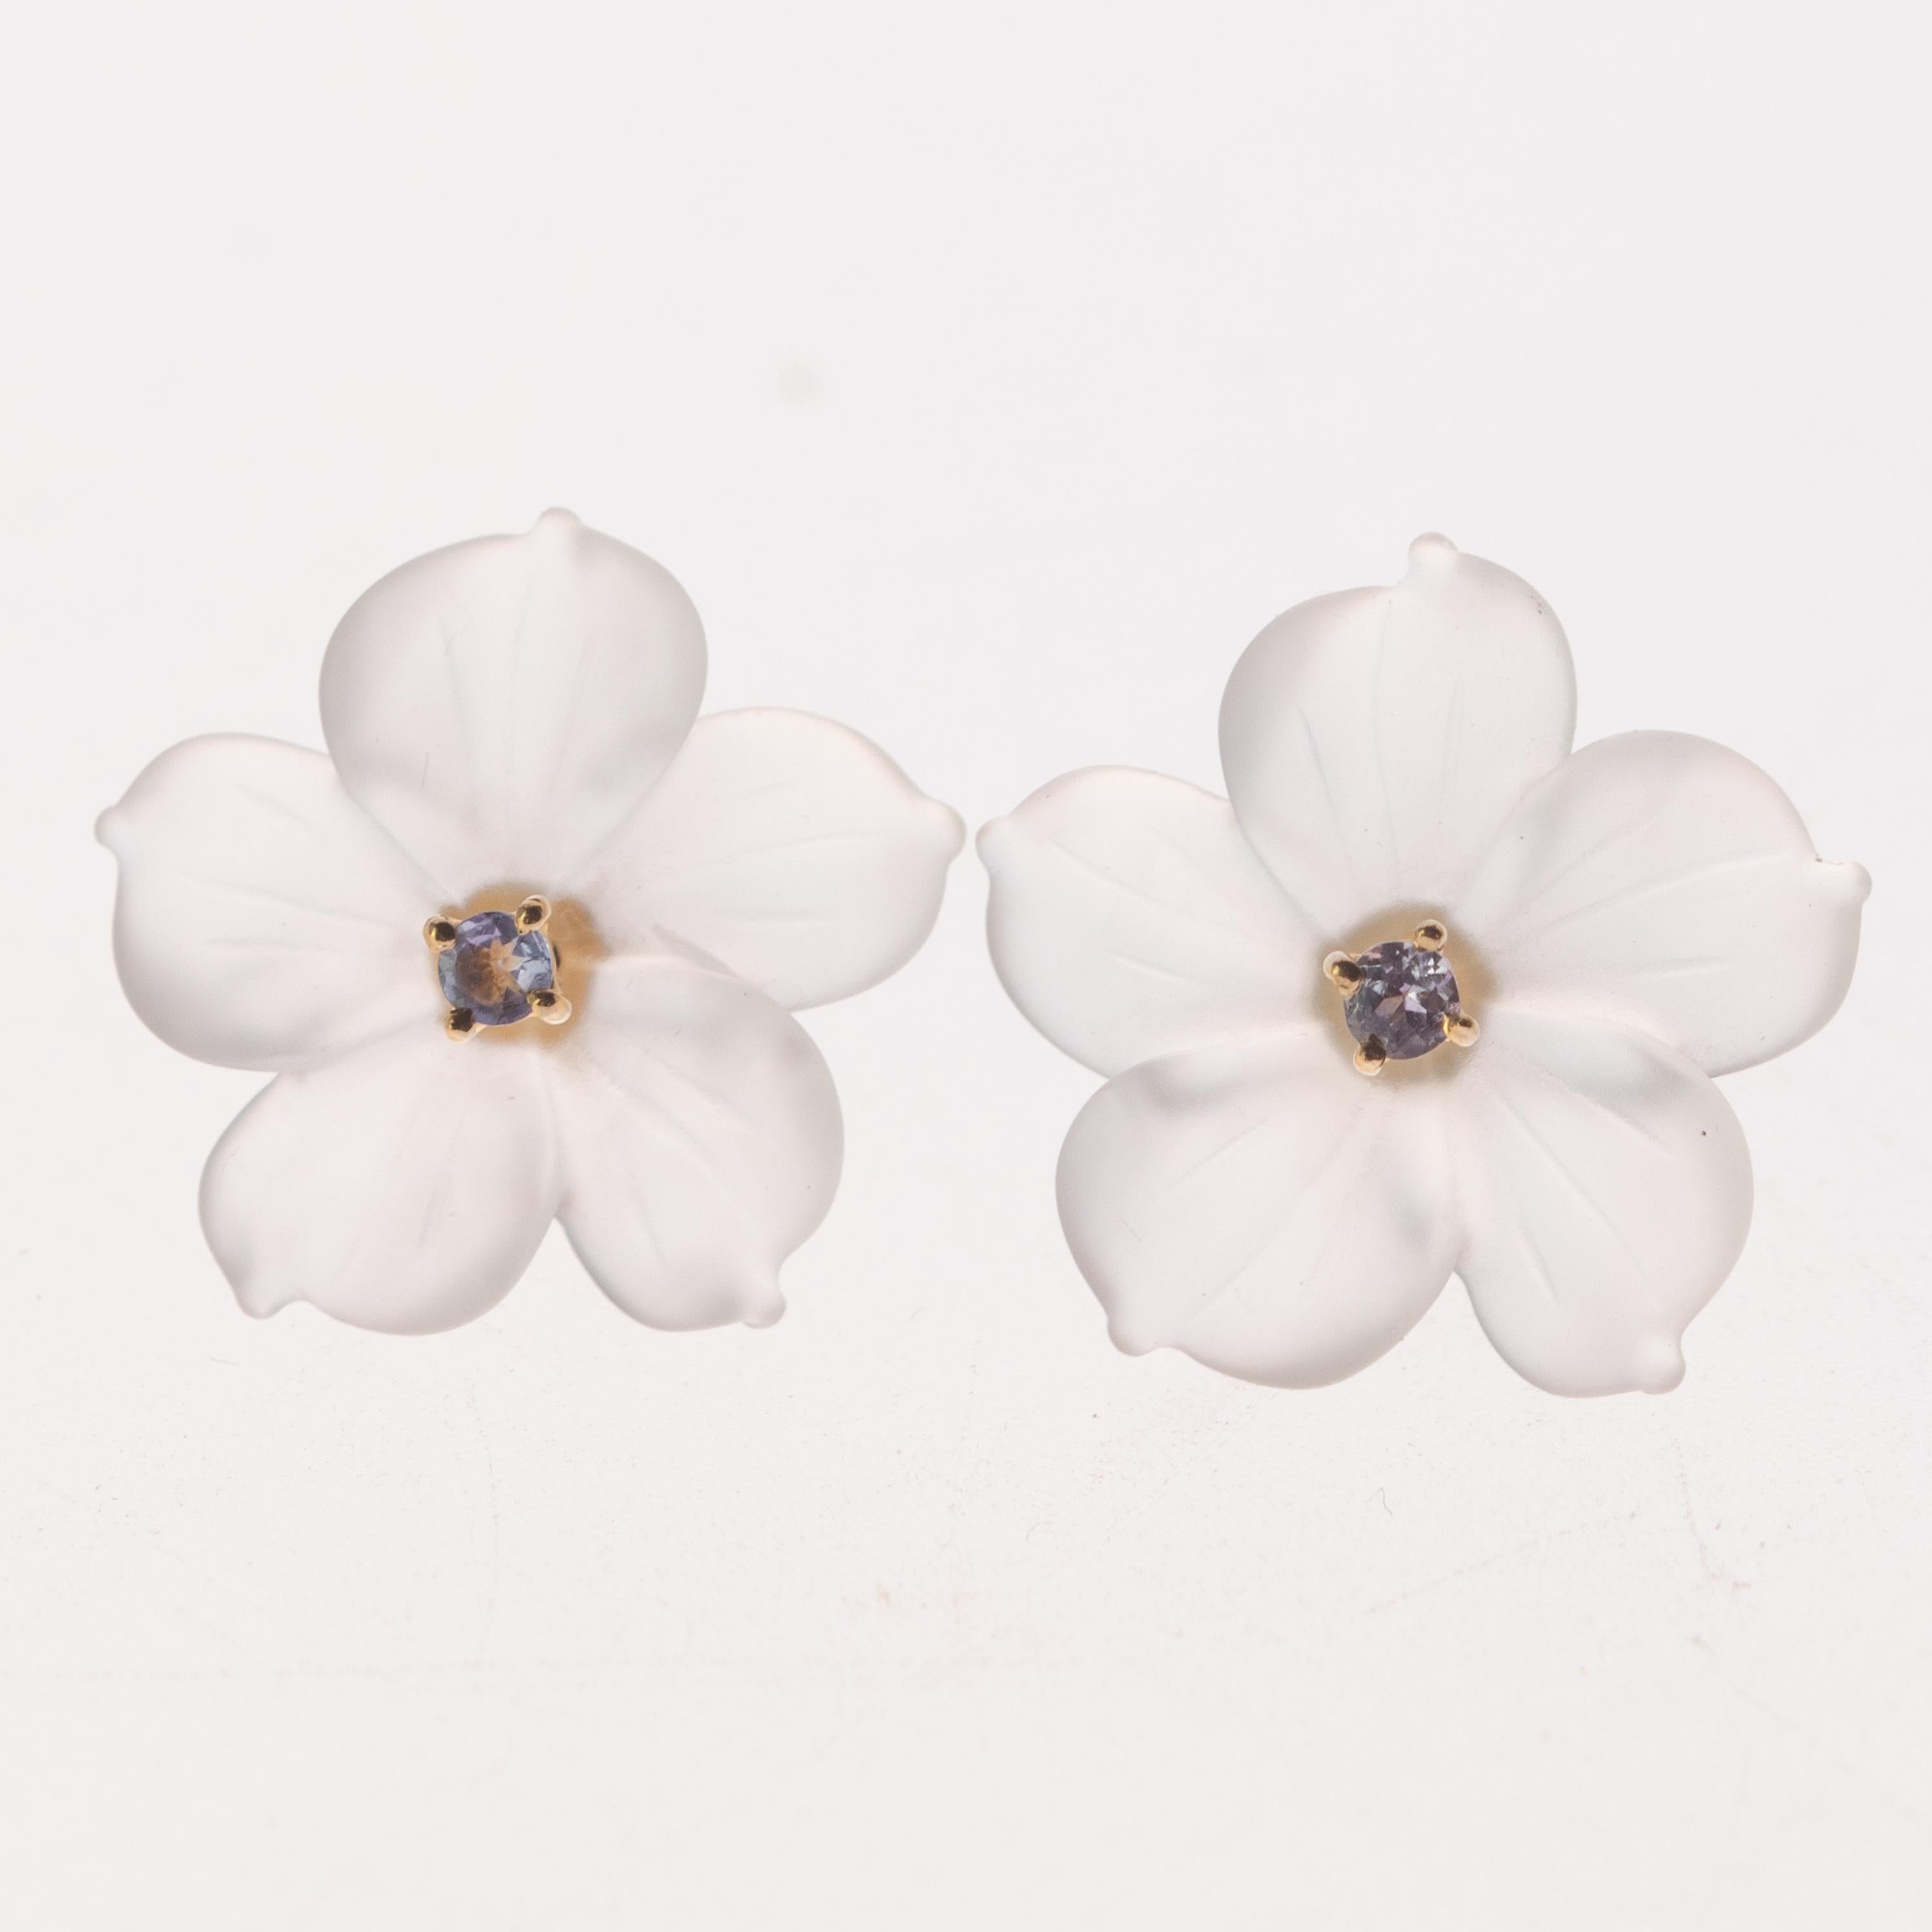 Astonishing and delicate Tanzanite and rock crystal flowers. Stud earrings embellished with a modern and exquisite style. Carved petals that evoke the italian handmade traditional jewelry work, wrapping itself in a soft look enriched with 18 karat